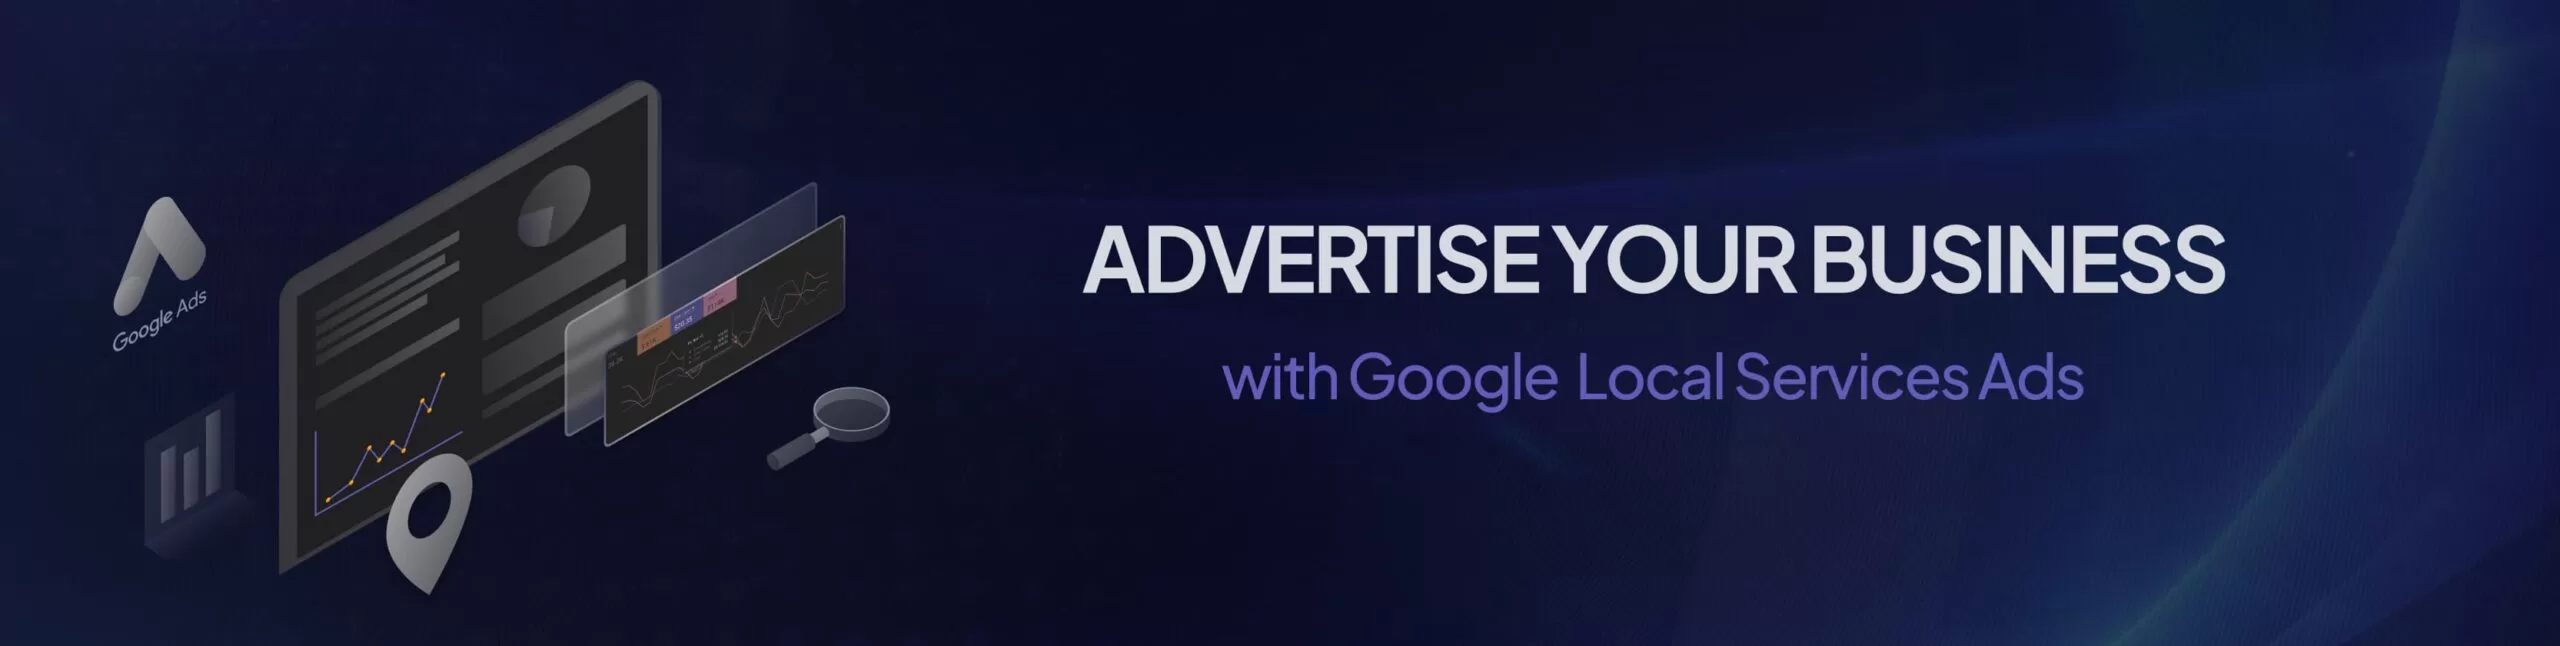 affordable google local service ads